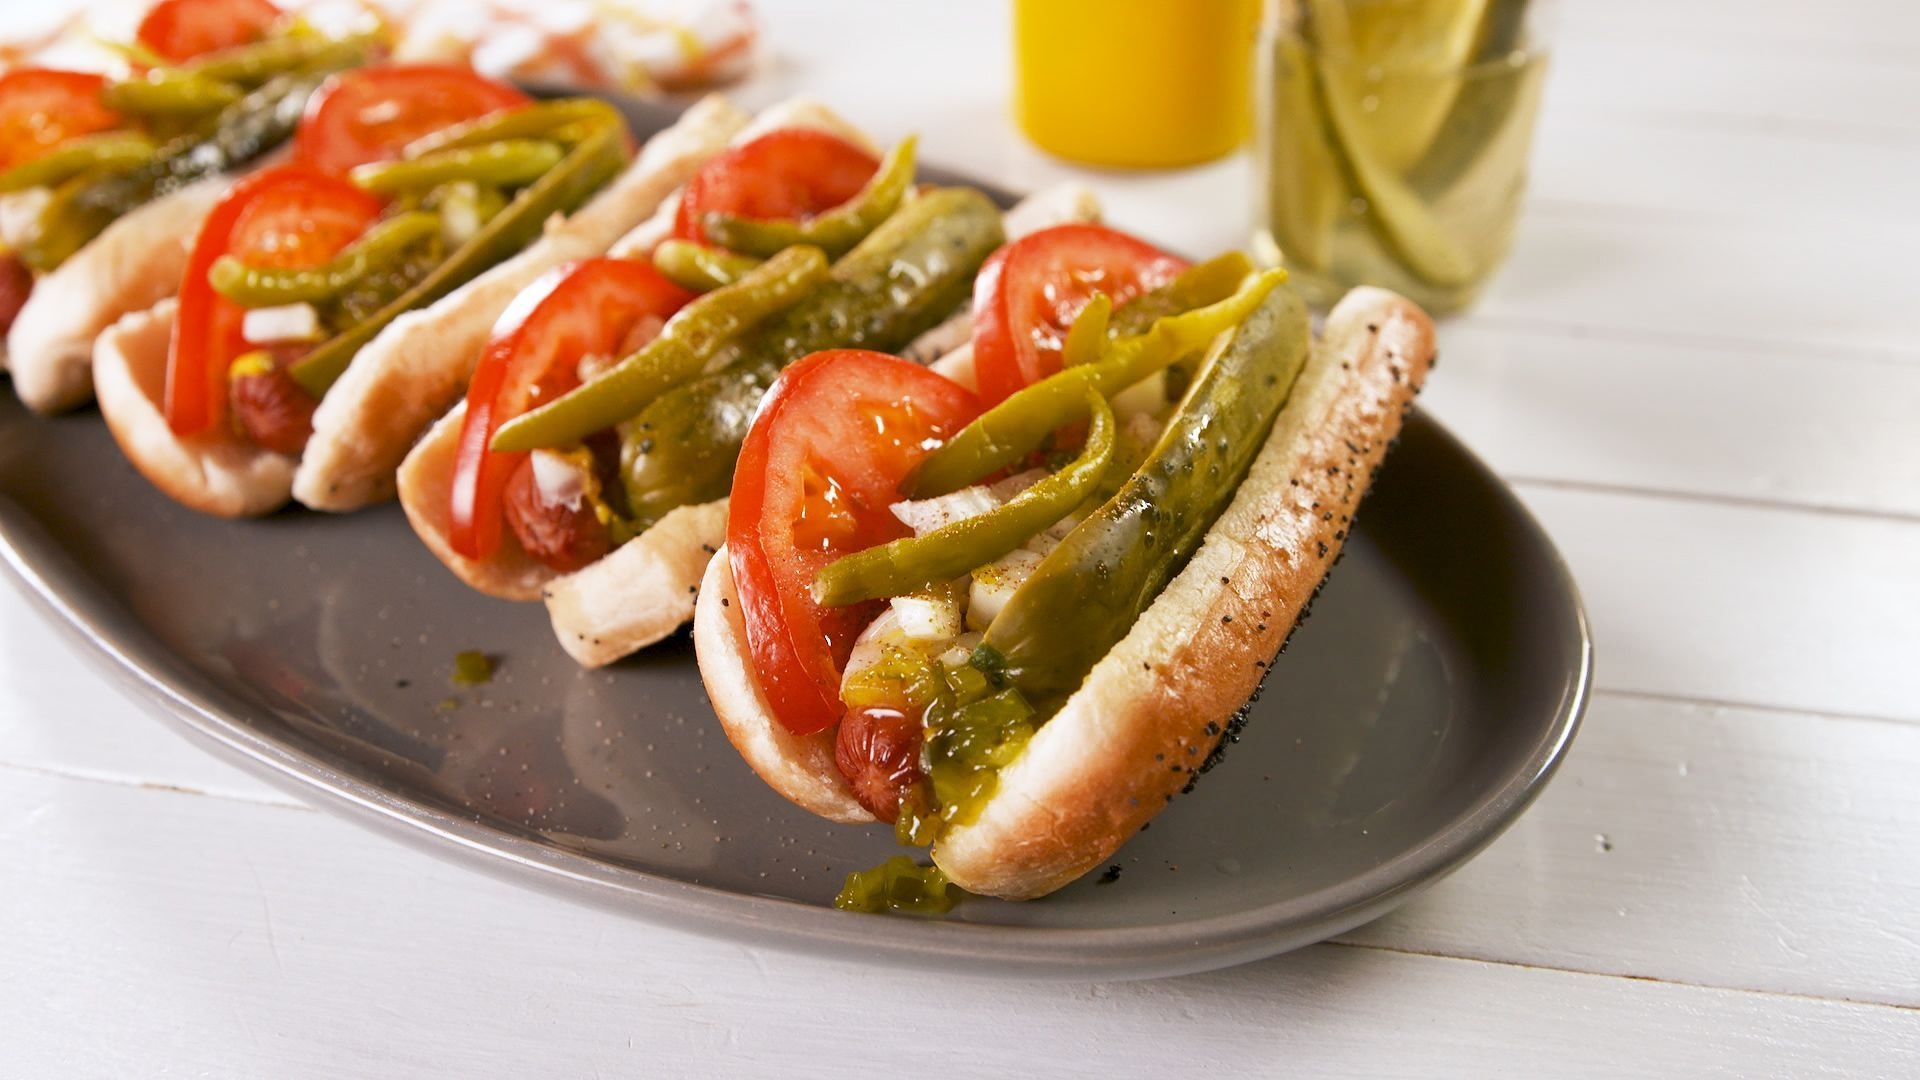 Chicago-style hot dog, Poppy seed bun, Tangy pickle spears, Sport peppers, 1920x1080 Full HD Desktop